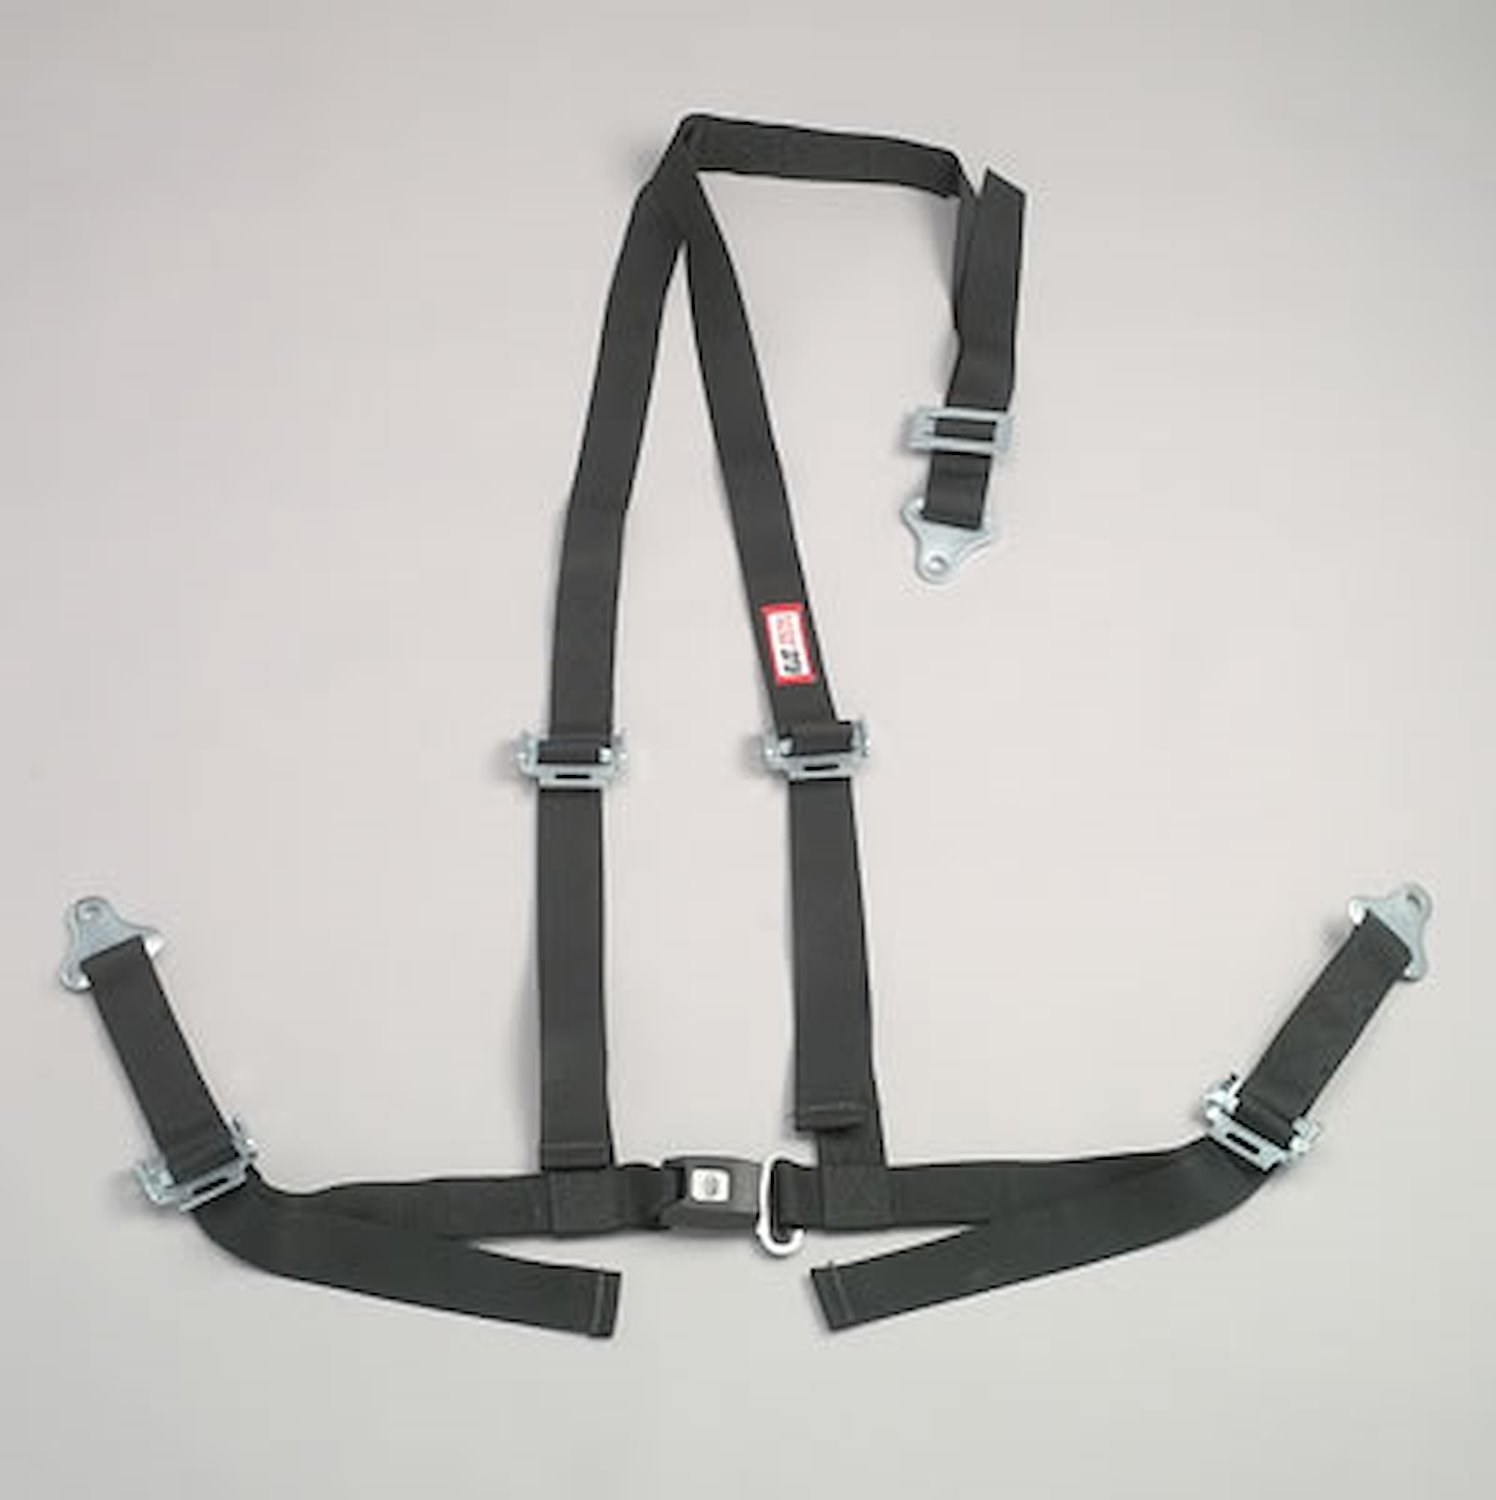 NON-SFI B&T HARNESS 2 PULL DOWN Lap Belt SNAP 2 S. H. Y FLOOR Mount WRAP/SNAP w/STERNUM STRAP YELLOW